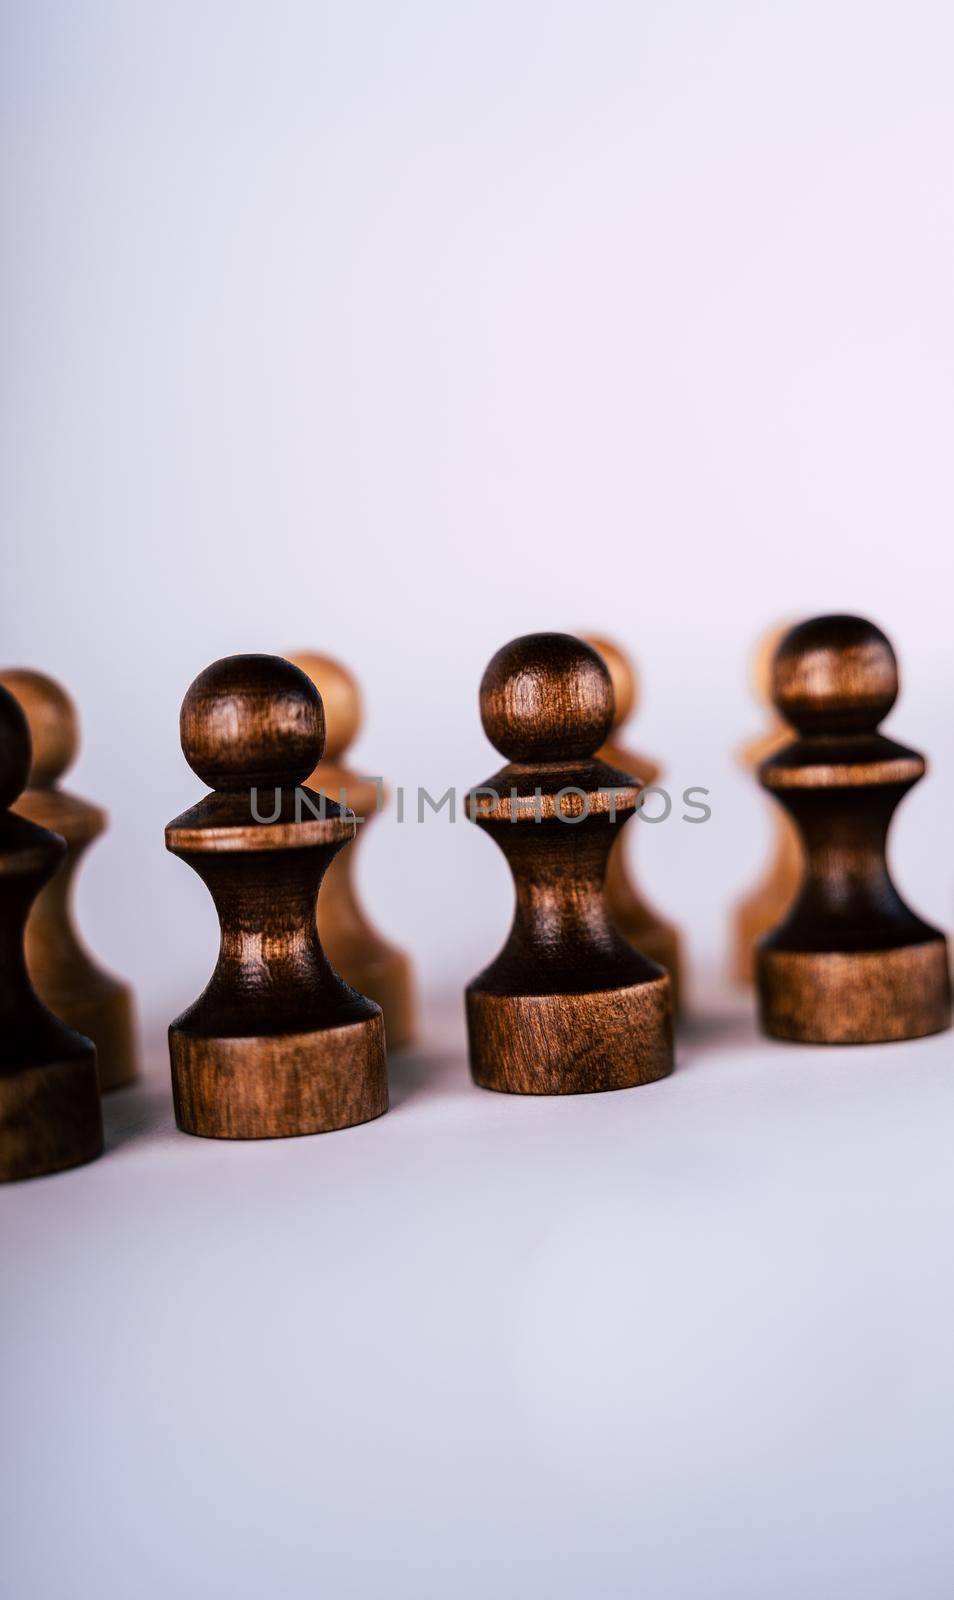 Close up of rows of black and white wooden chess pieces on white background. Selective focus on black pawns